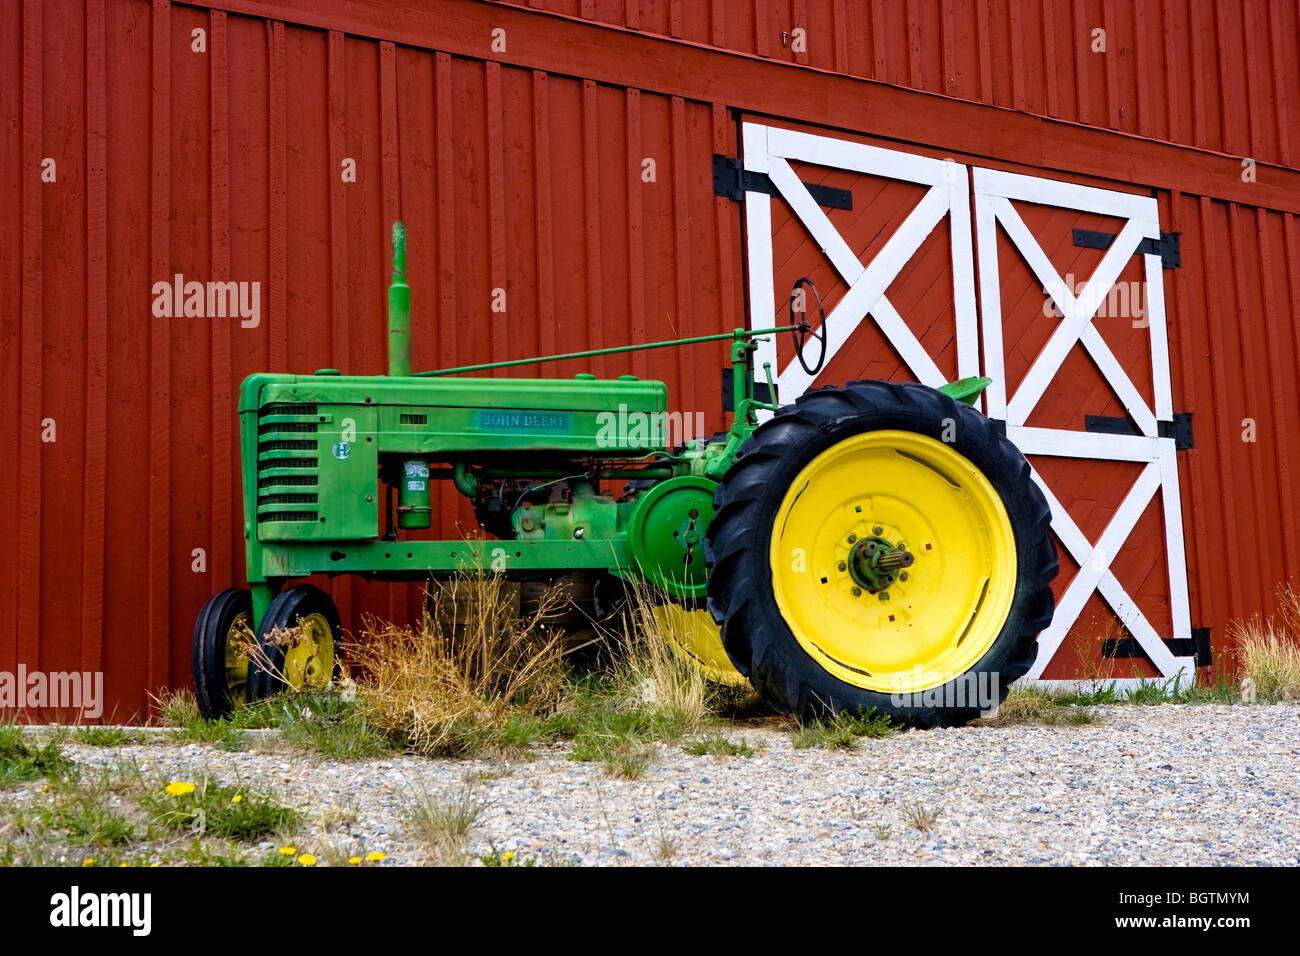 Green vintage John Deere tractor with yellow wheels parked against red barn Stock Photo